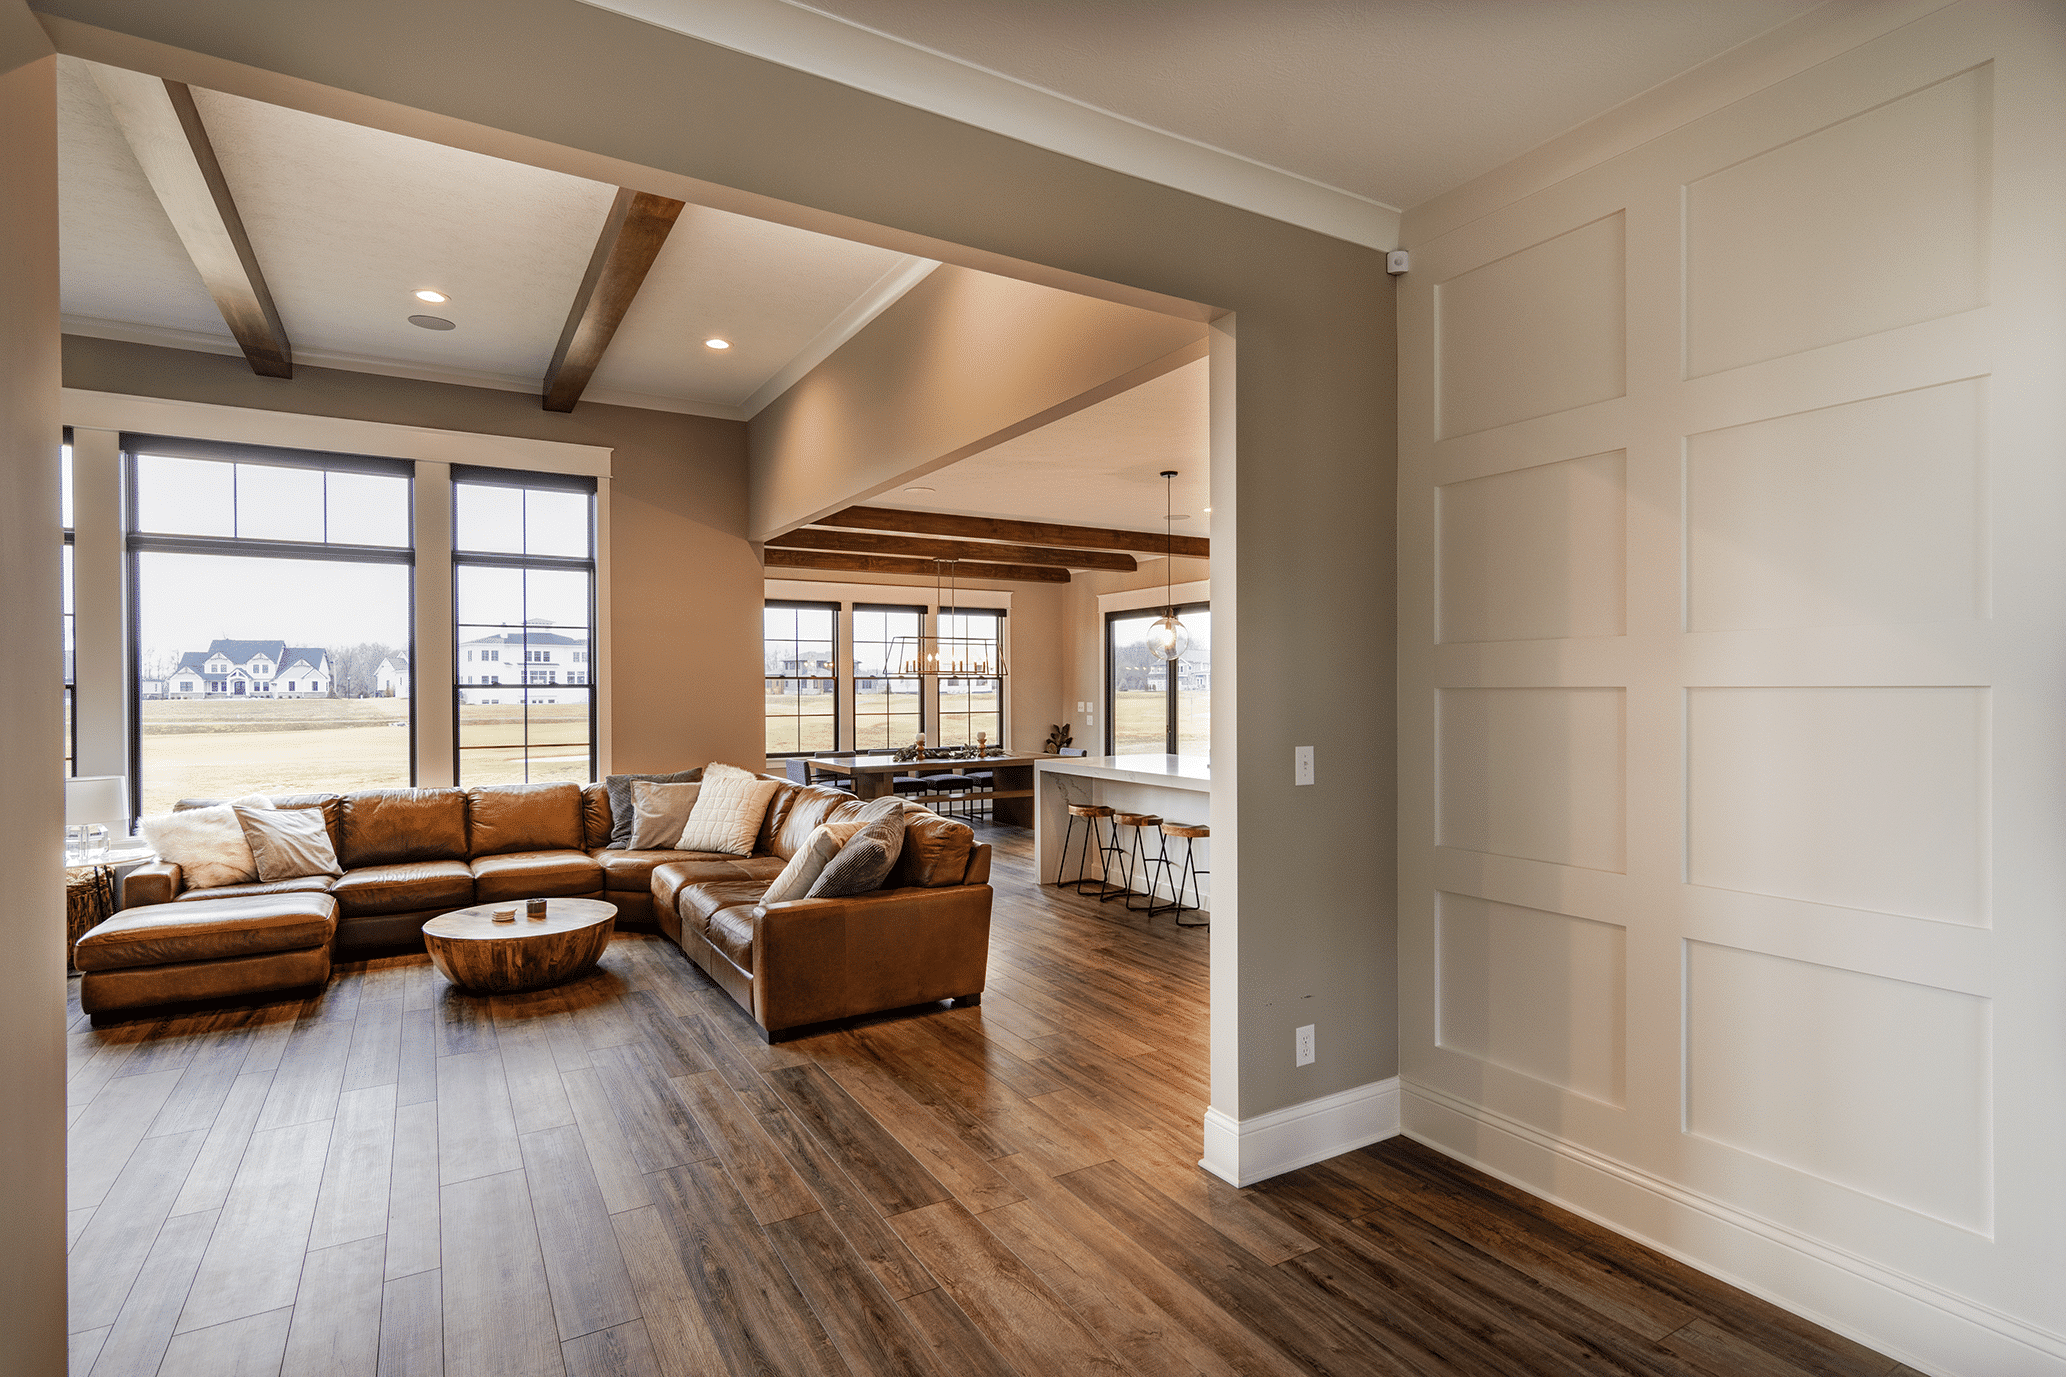 A custom built living room adorned with beautiful hardwood floors and a spacious window, nestled in the heart of Indianapolis, Indiana.